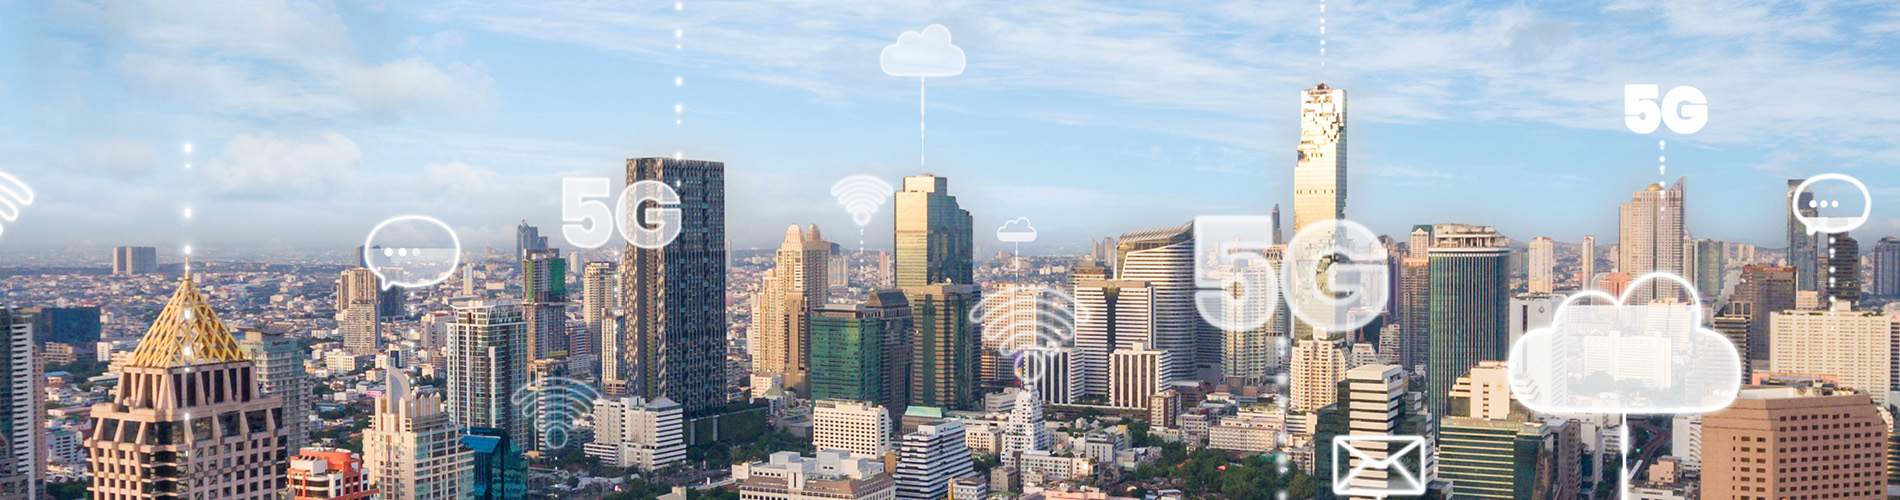 Accelerate your smart city transformation with Bell and Esri.